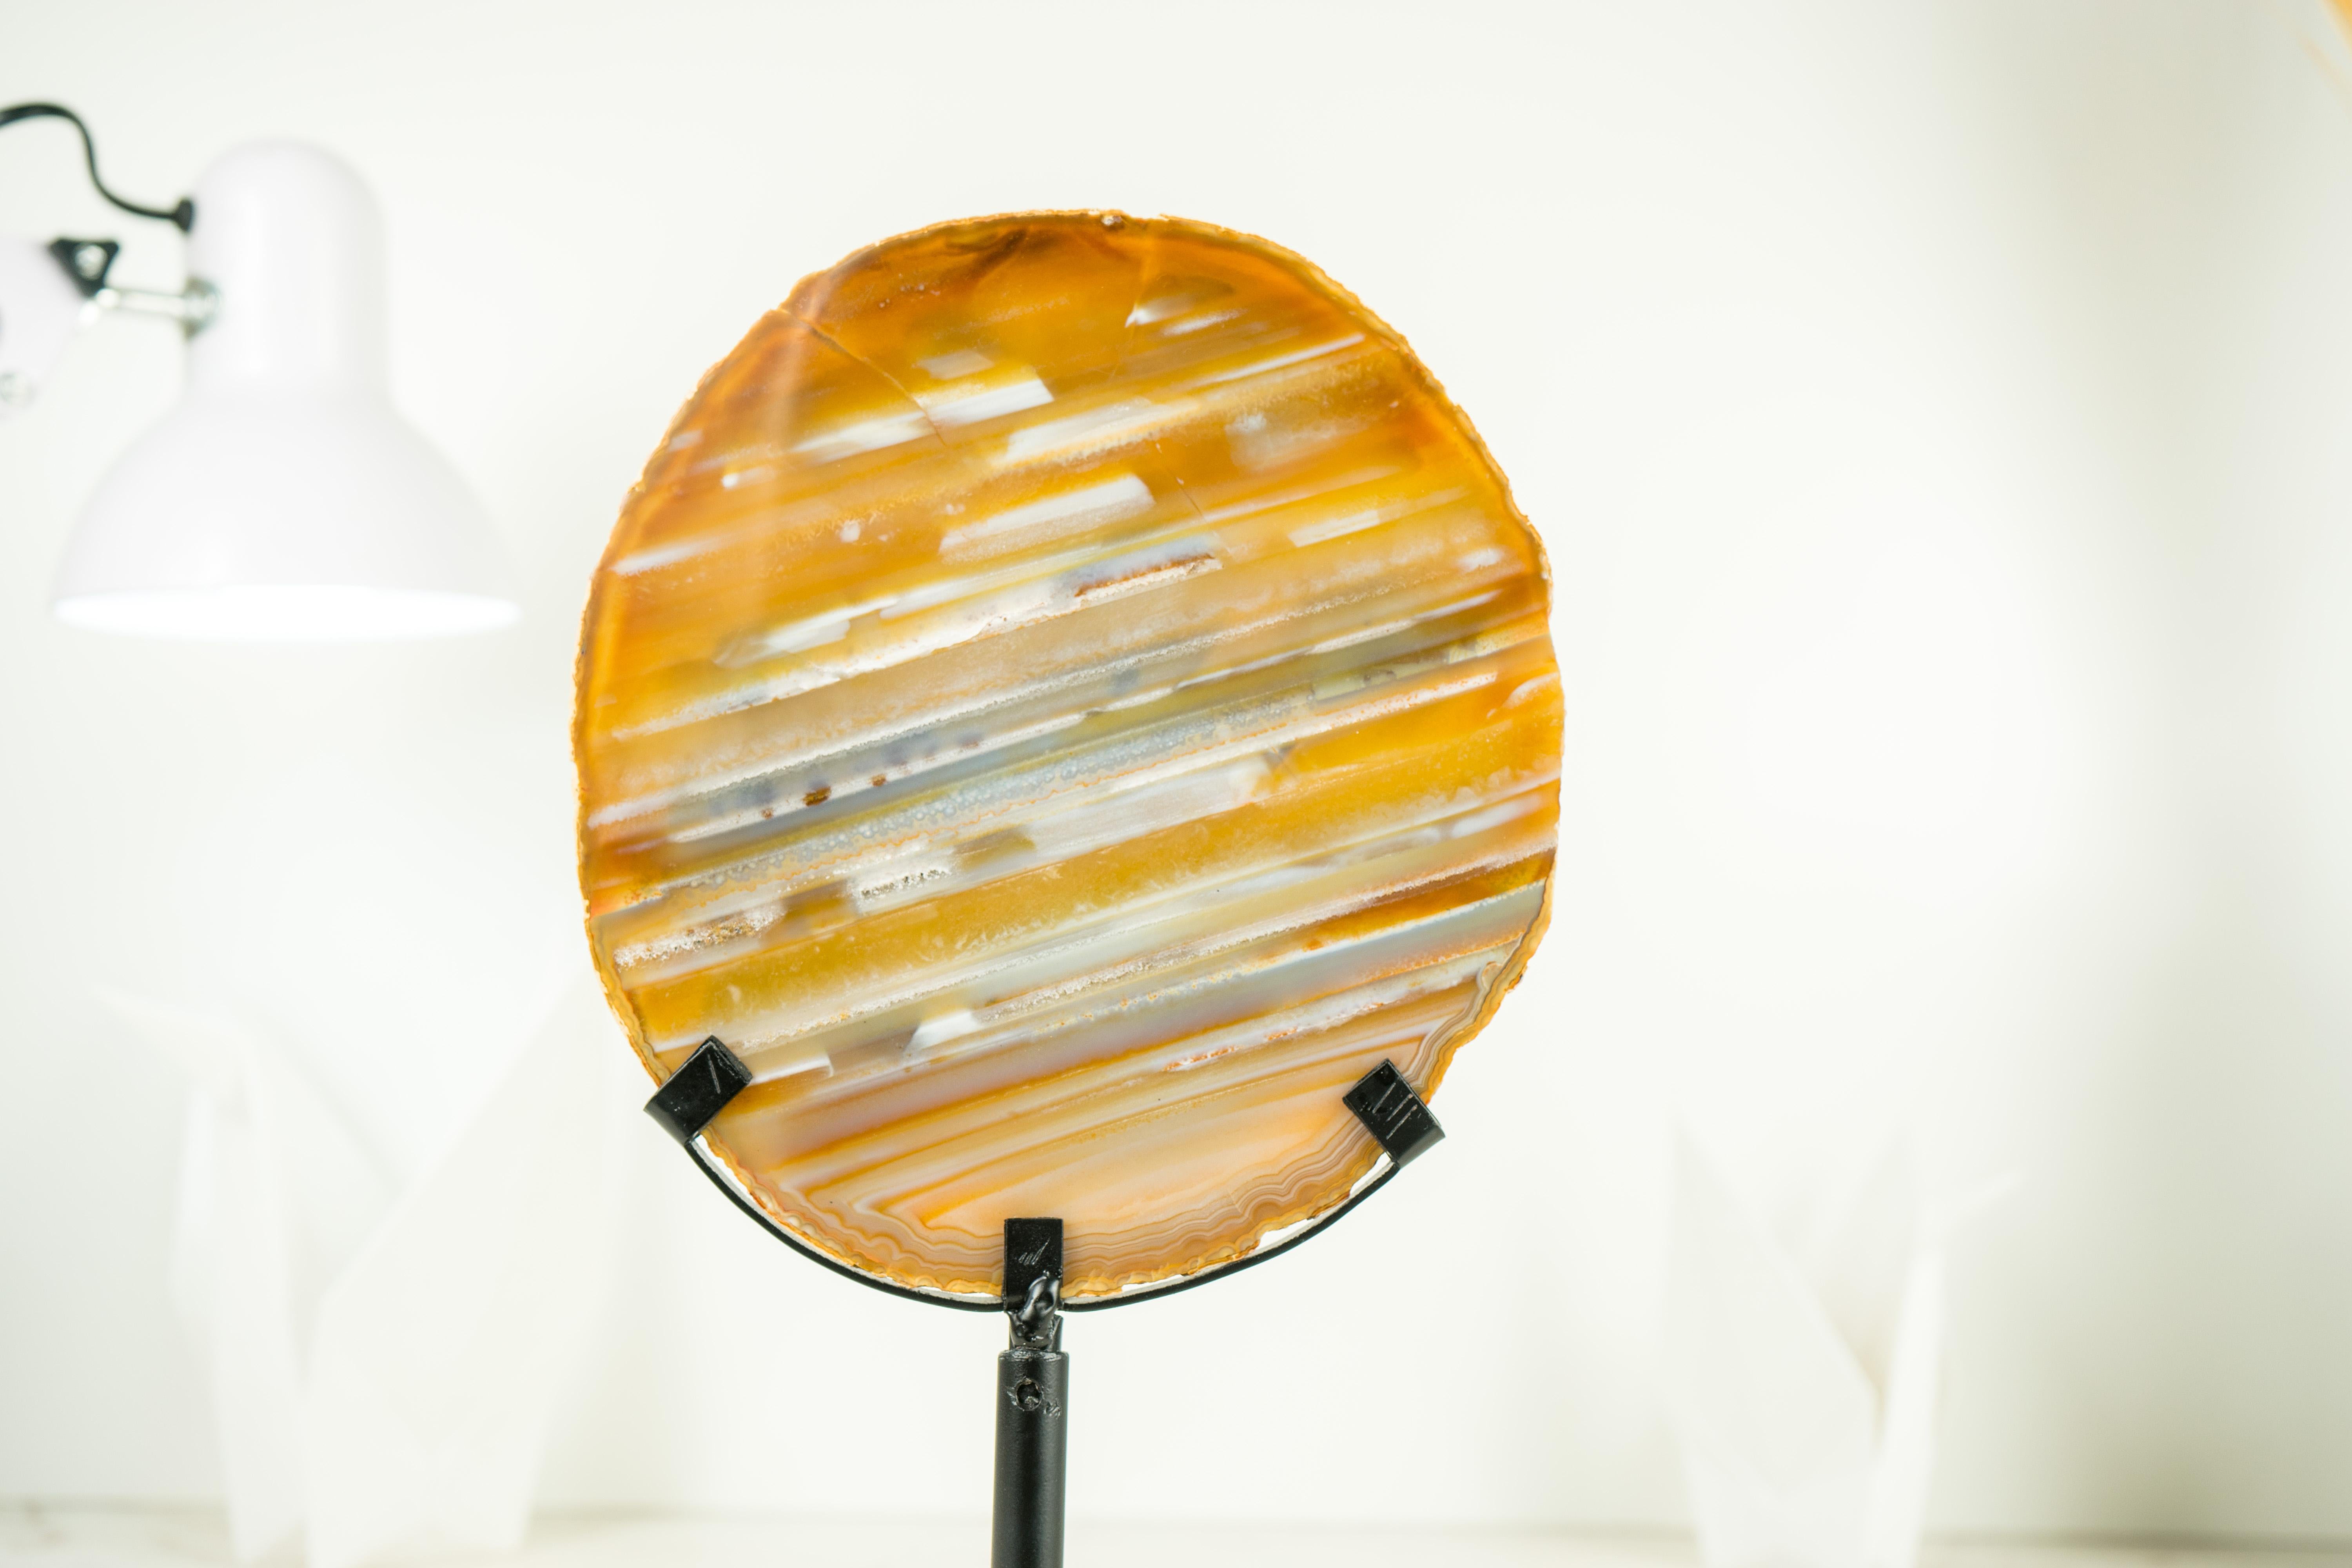 Gallery Grade Yellow, Blue, and White Agate Geode Slice with Horizontal Water-Lines Bandings

▫️ Description

An agate yet to be described in the Agate World, this Agate Slice from Bahia brings gorgeous aesthetics, resulting in one of the rarest